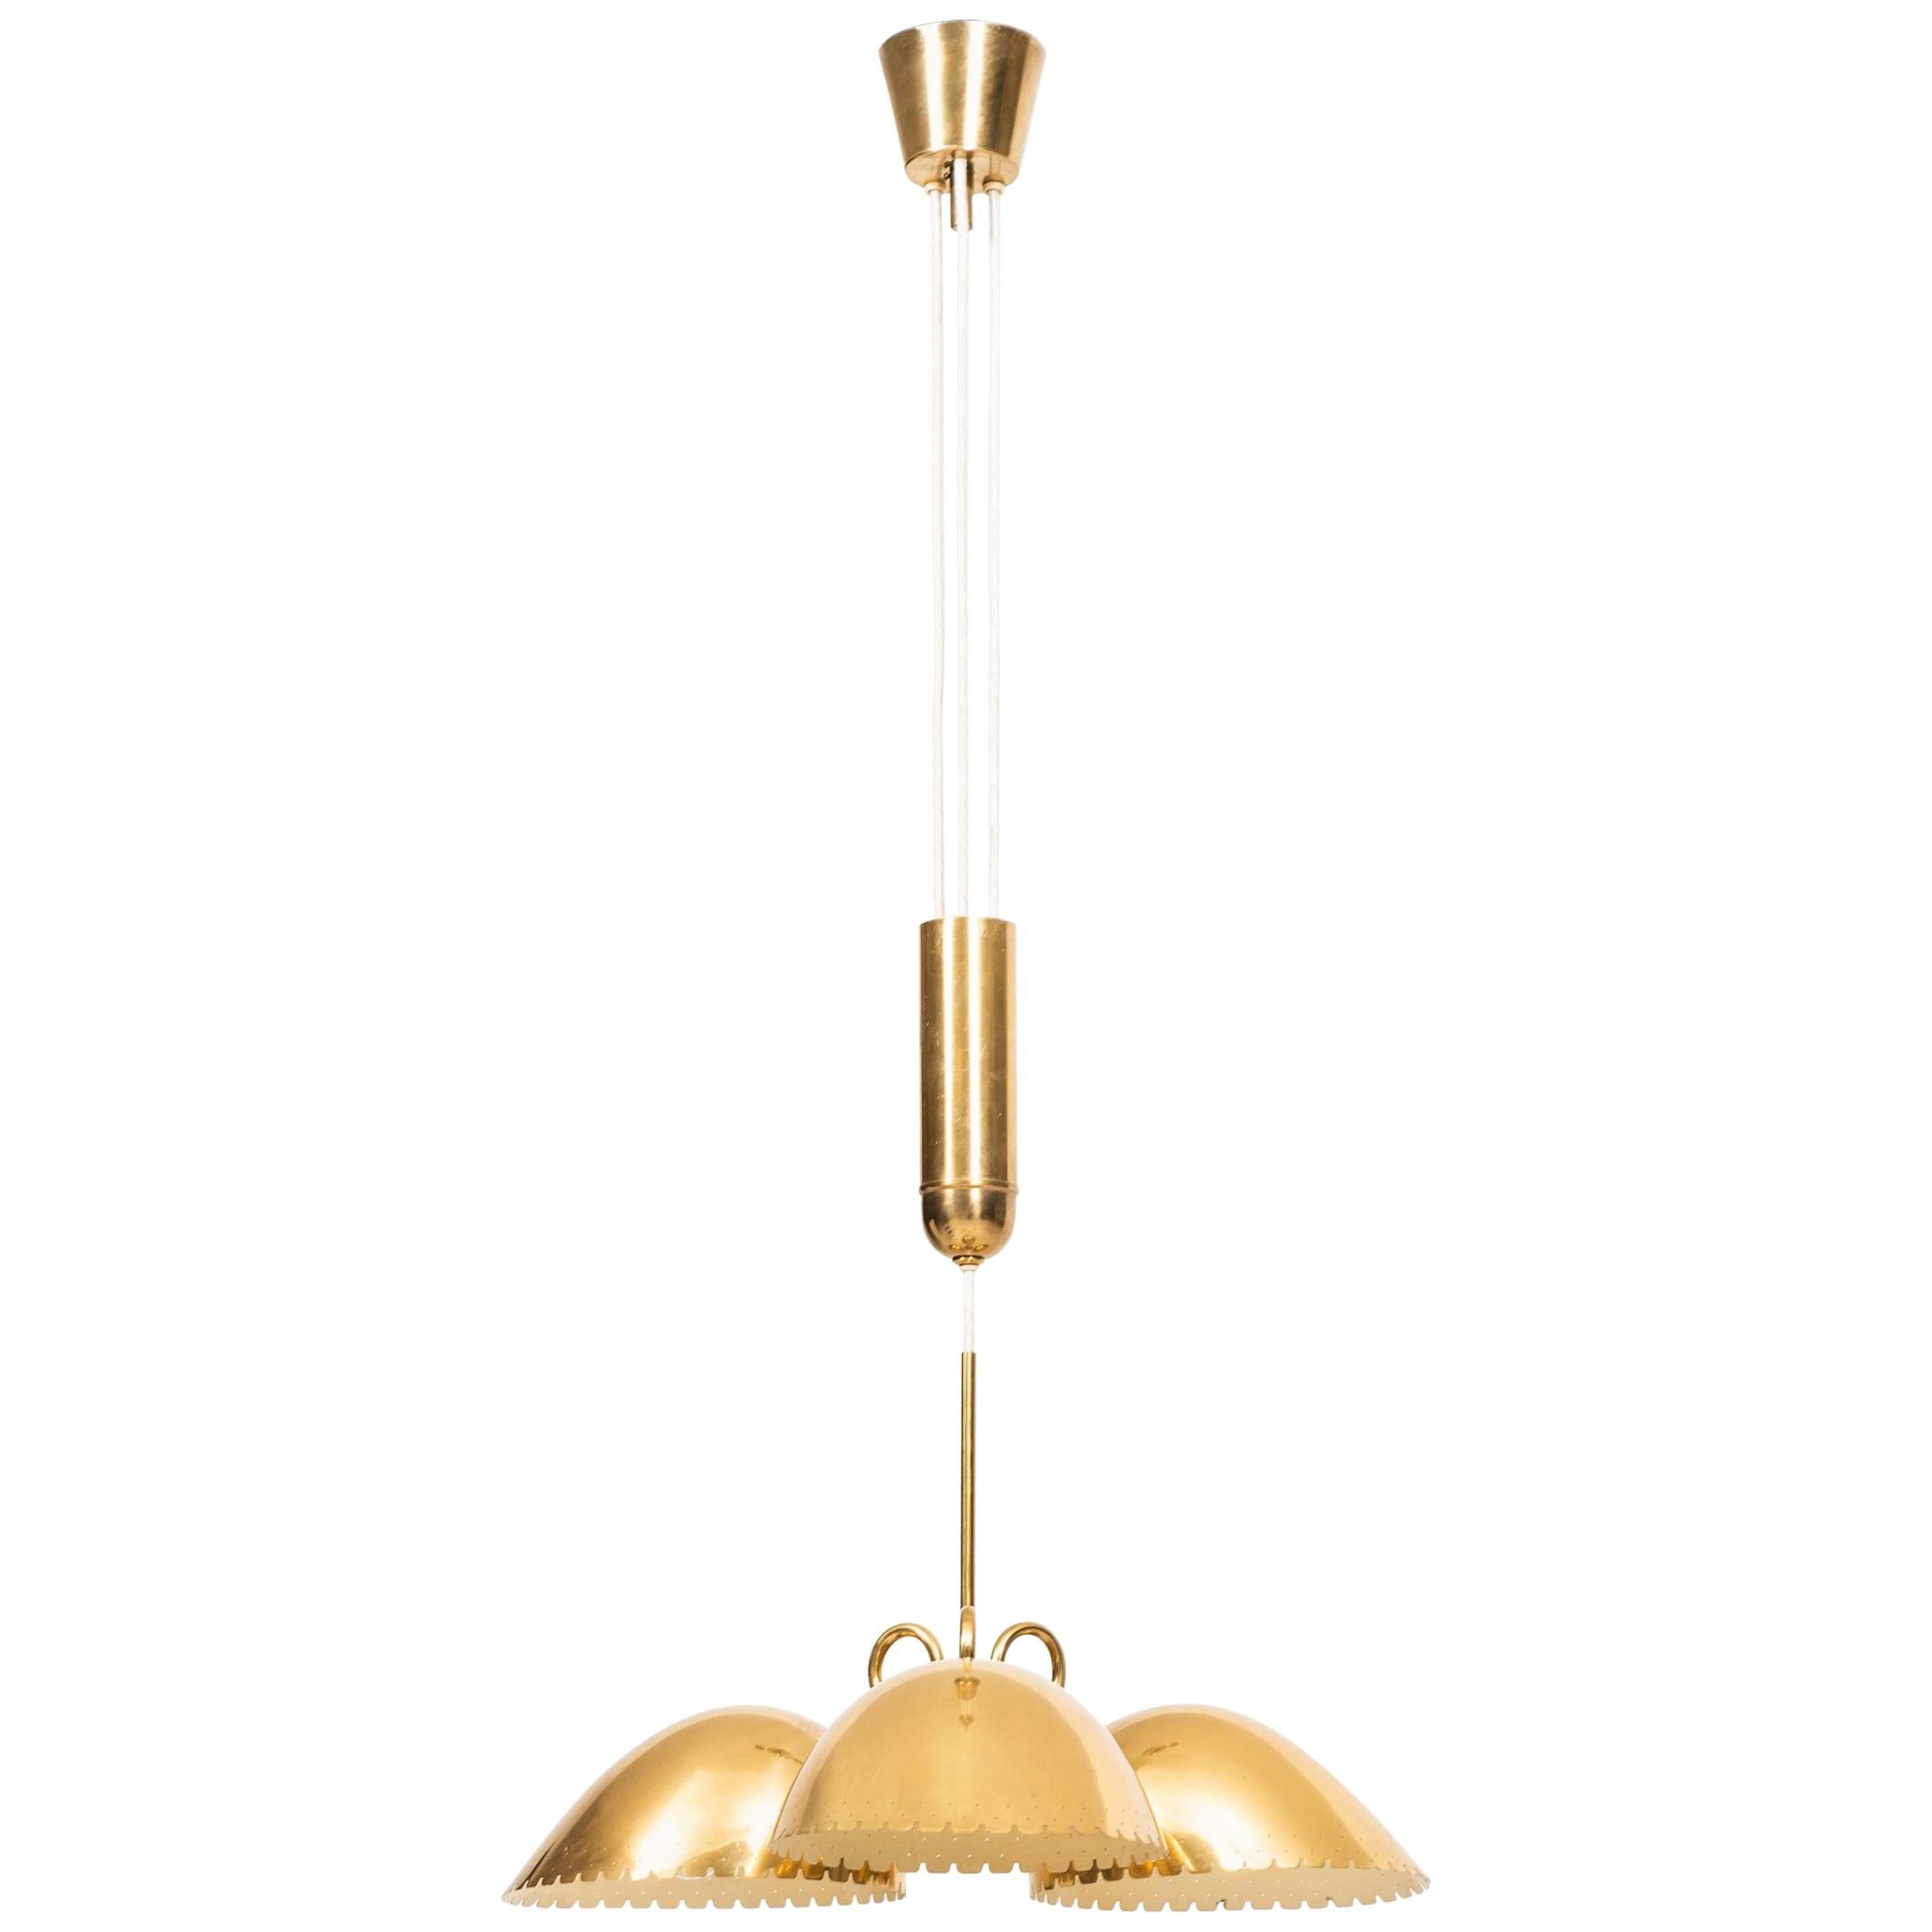 Ceiling Lamp Attributed to Carl-Axel Acking Produced by Böhlmarks in Sweden